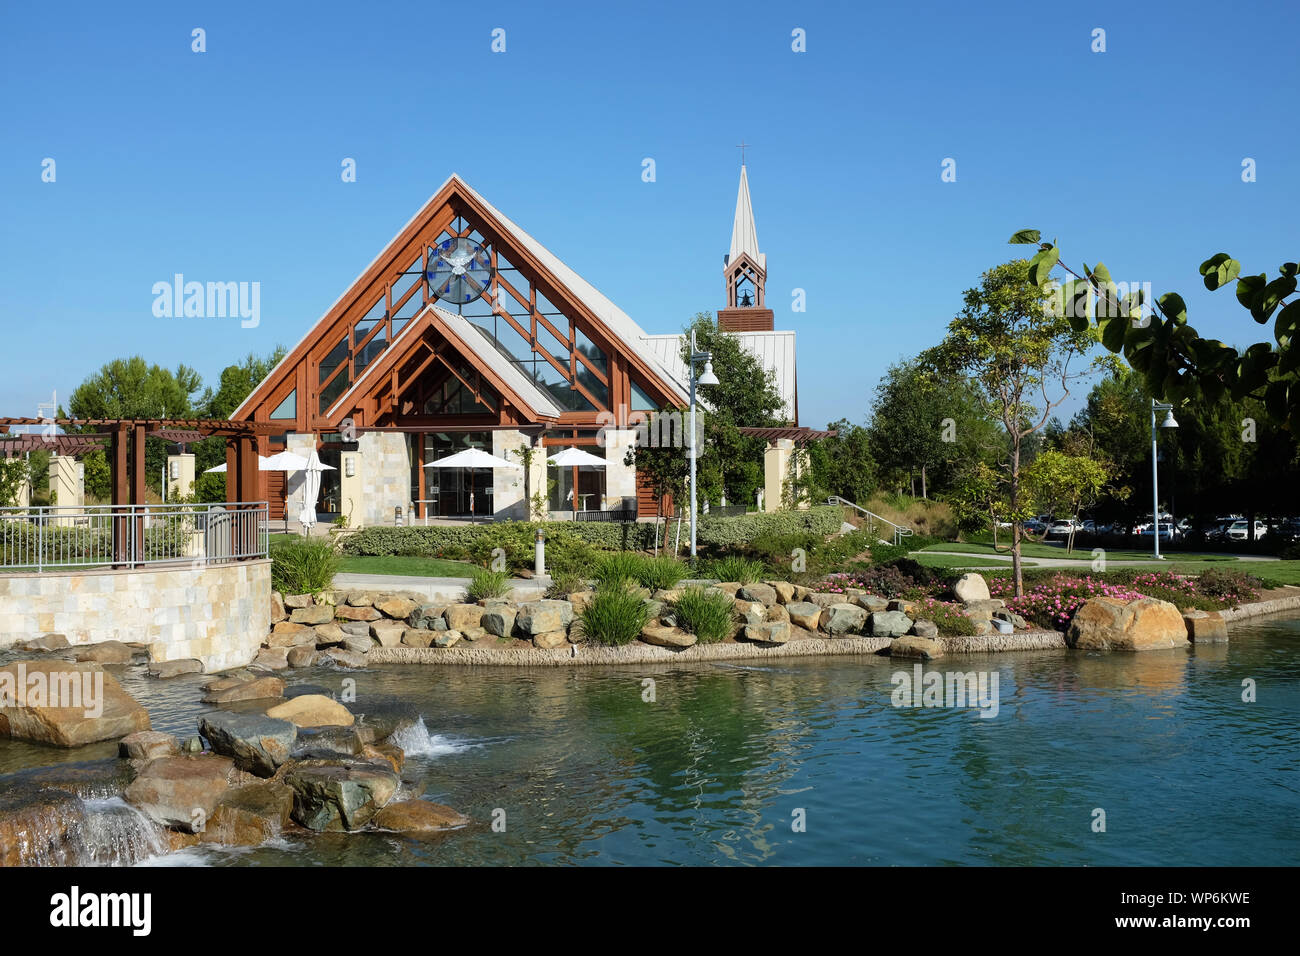 IRVINE, CALIFORNIA - SEPT 7, 2019: Mariners Church Chapel and lake, a non-denominational, Christian Church located in central Orange County. Stock Photo